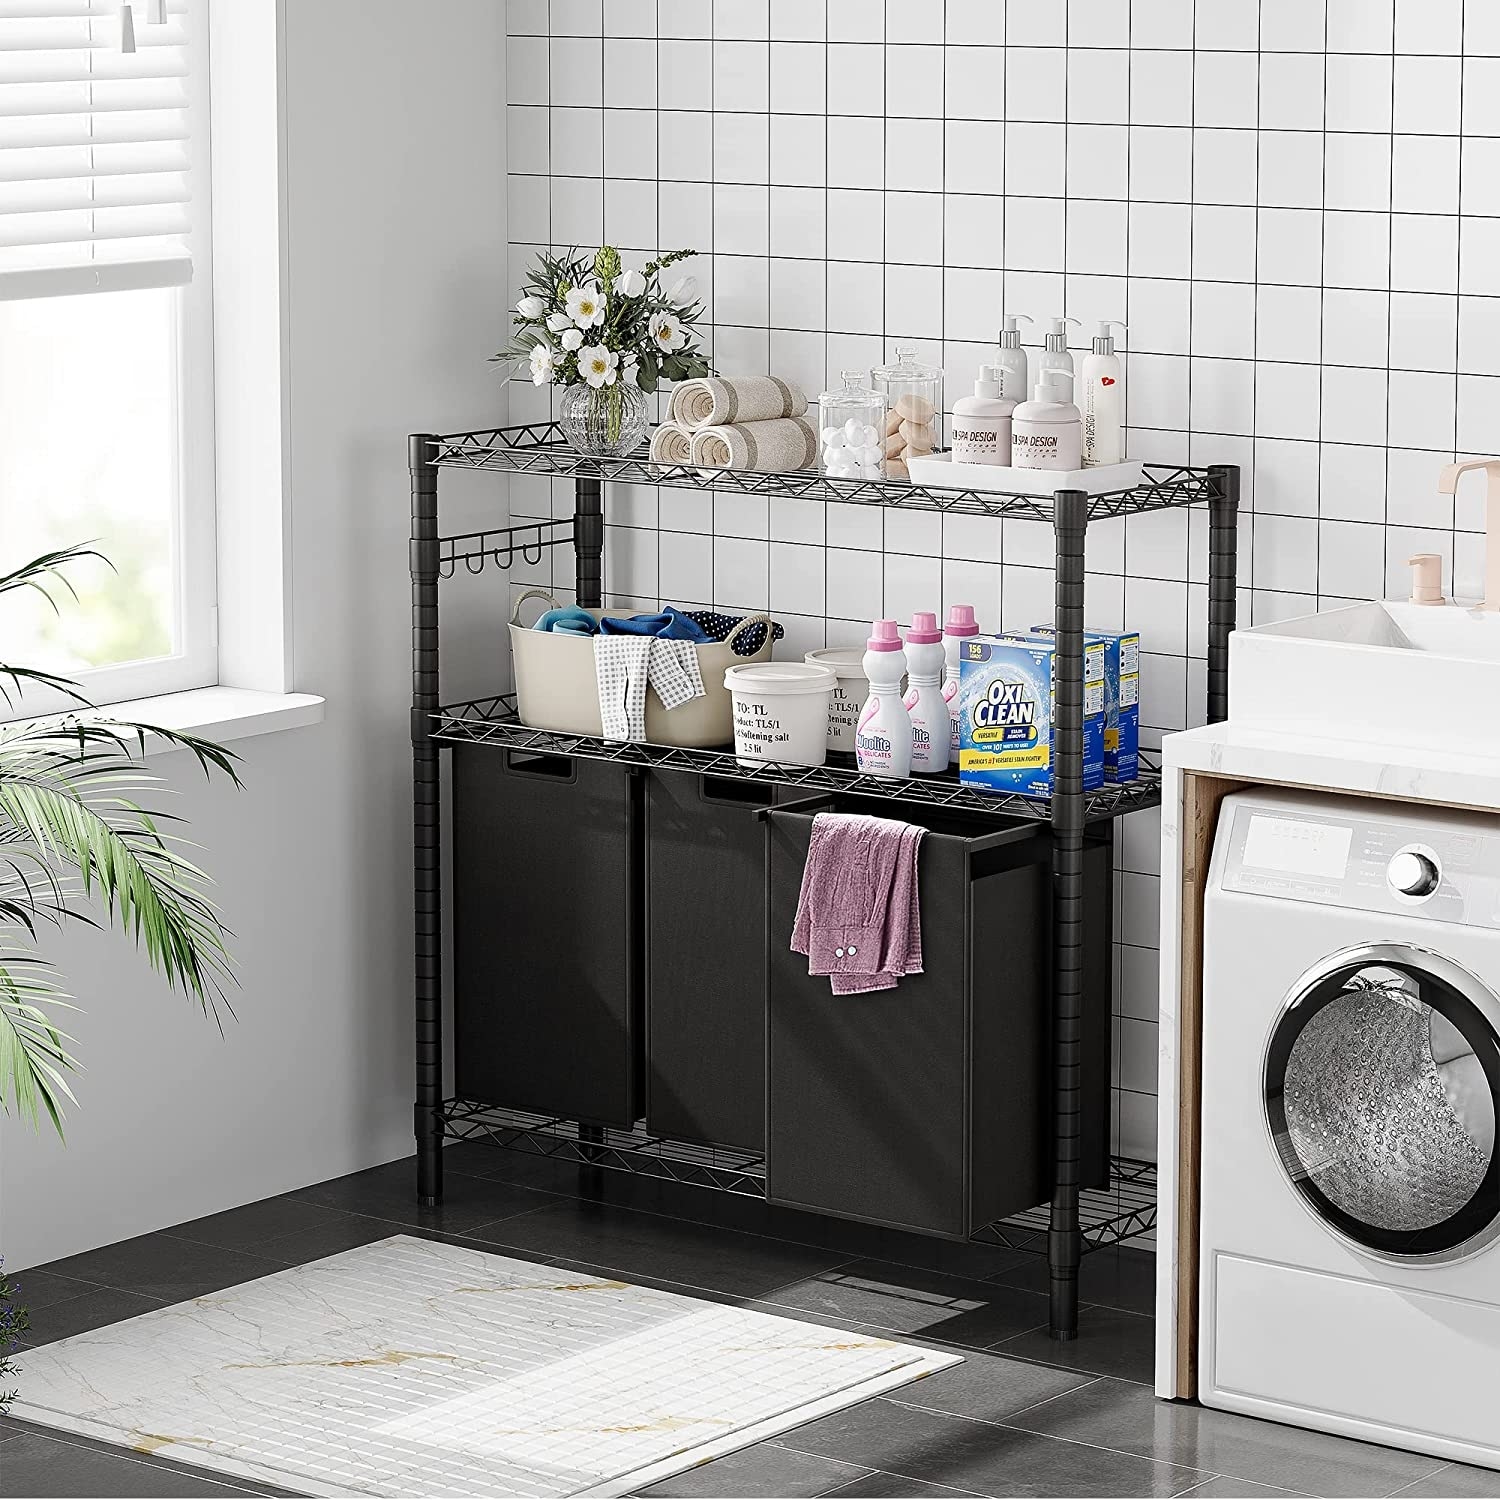 https://ak1.ostkcdn.com/images/products/is/images/direct/05473696c5a9cebf7e960360650e4201ecf8abc2/Laundry-Sorters-with-3-x-45L-Laundry-Bags-%26-2-Tier-Adjustable-Storage-Shelf.jpg